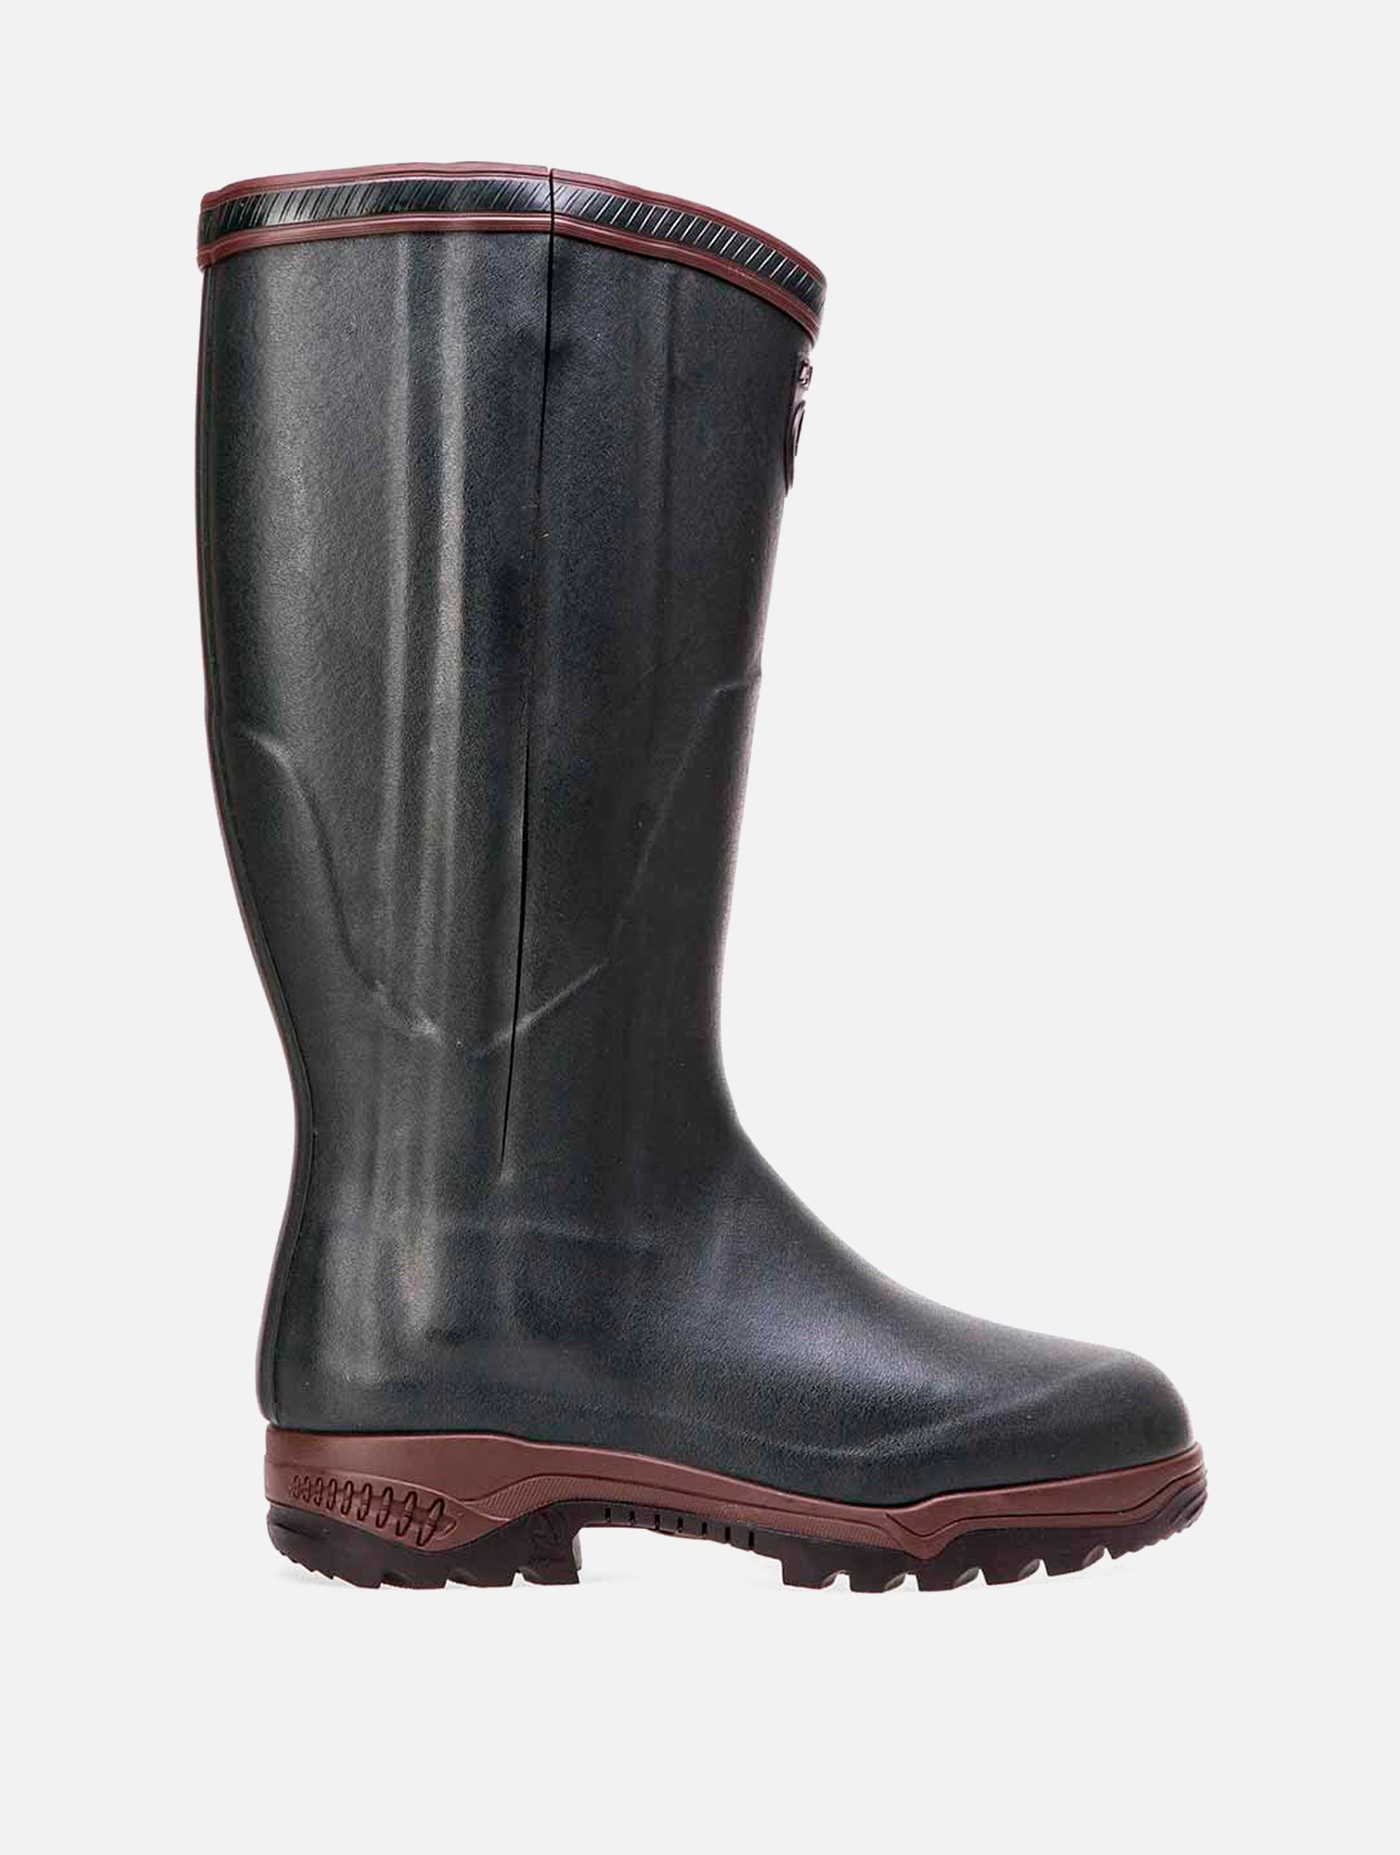 Aigle - Anti-fatigue adjustable boots for cold weather, Made in France Bronze Parcours® iso open |